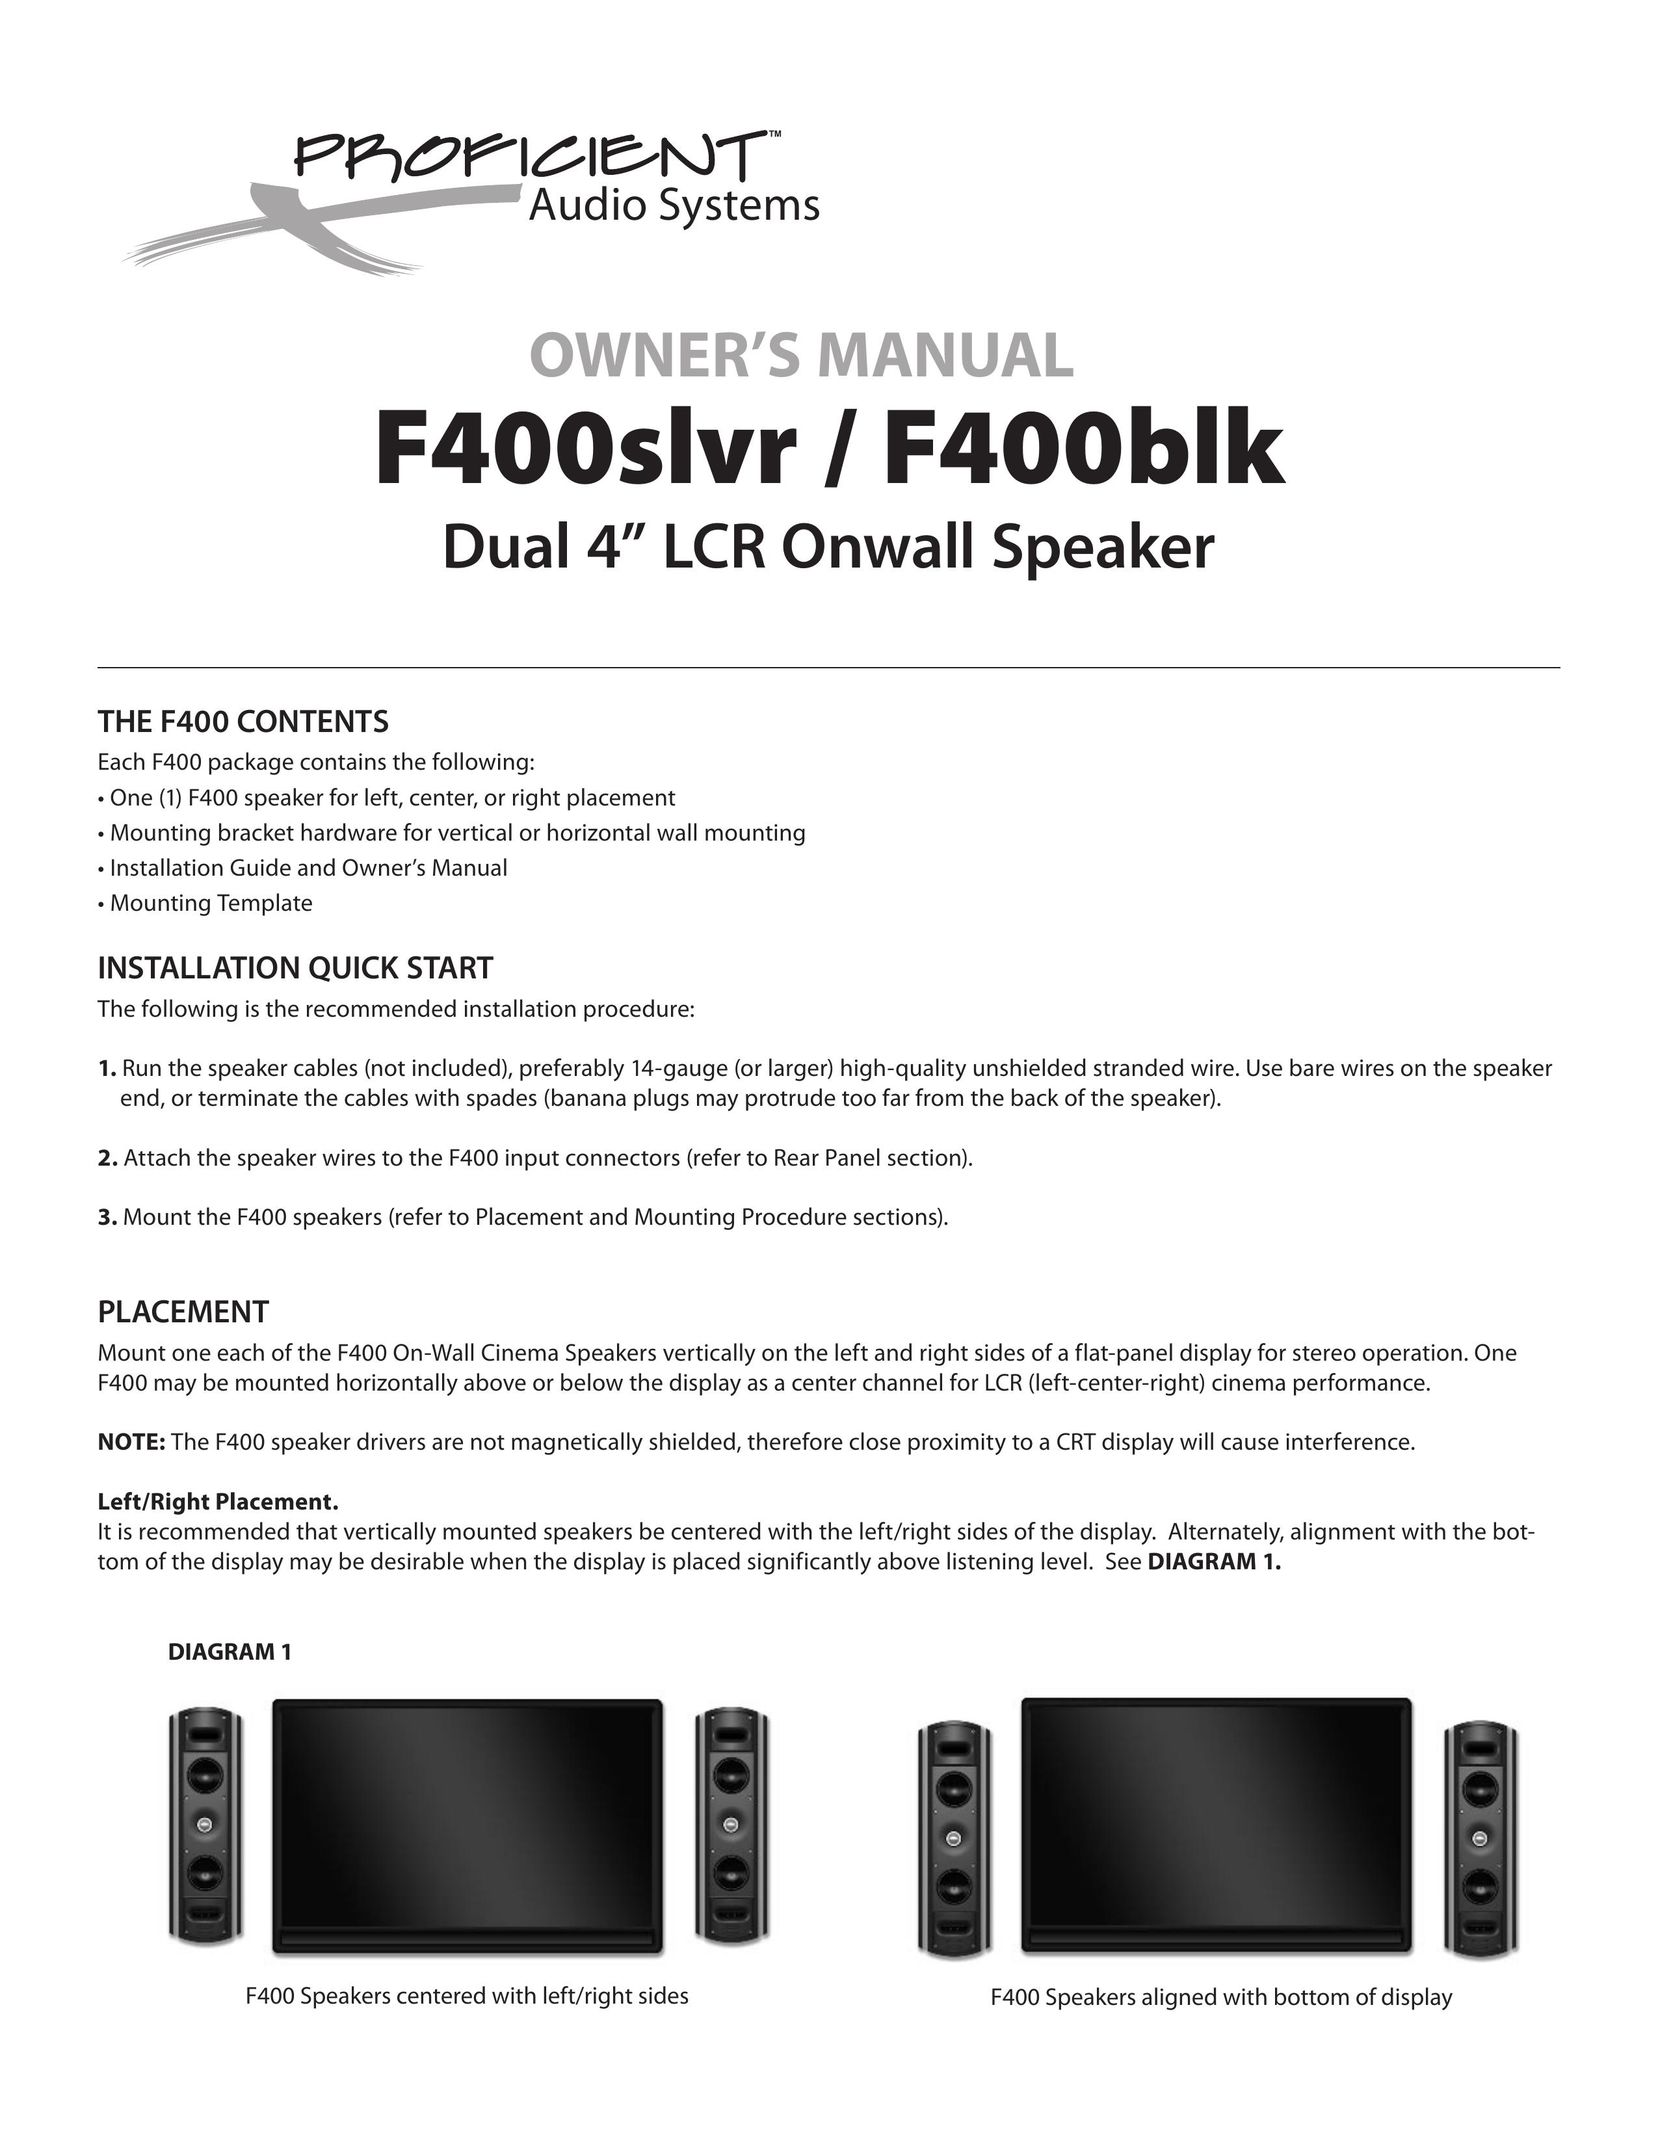 Proficient Audio Systems F400BLK Home Theater System User Manual